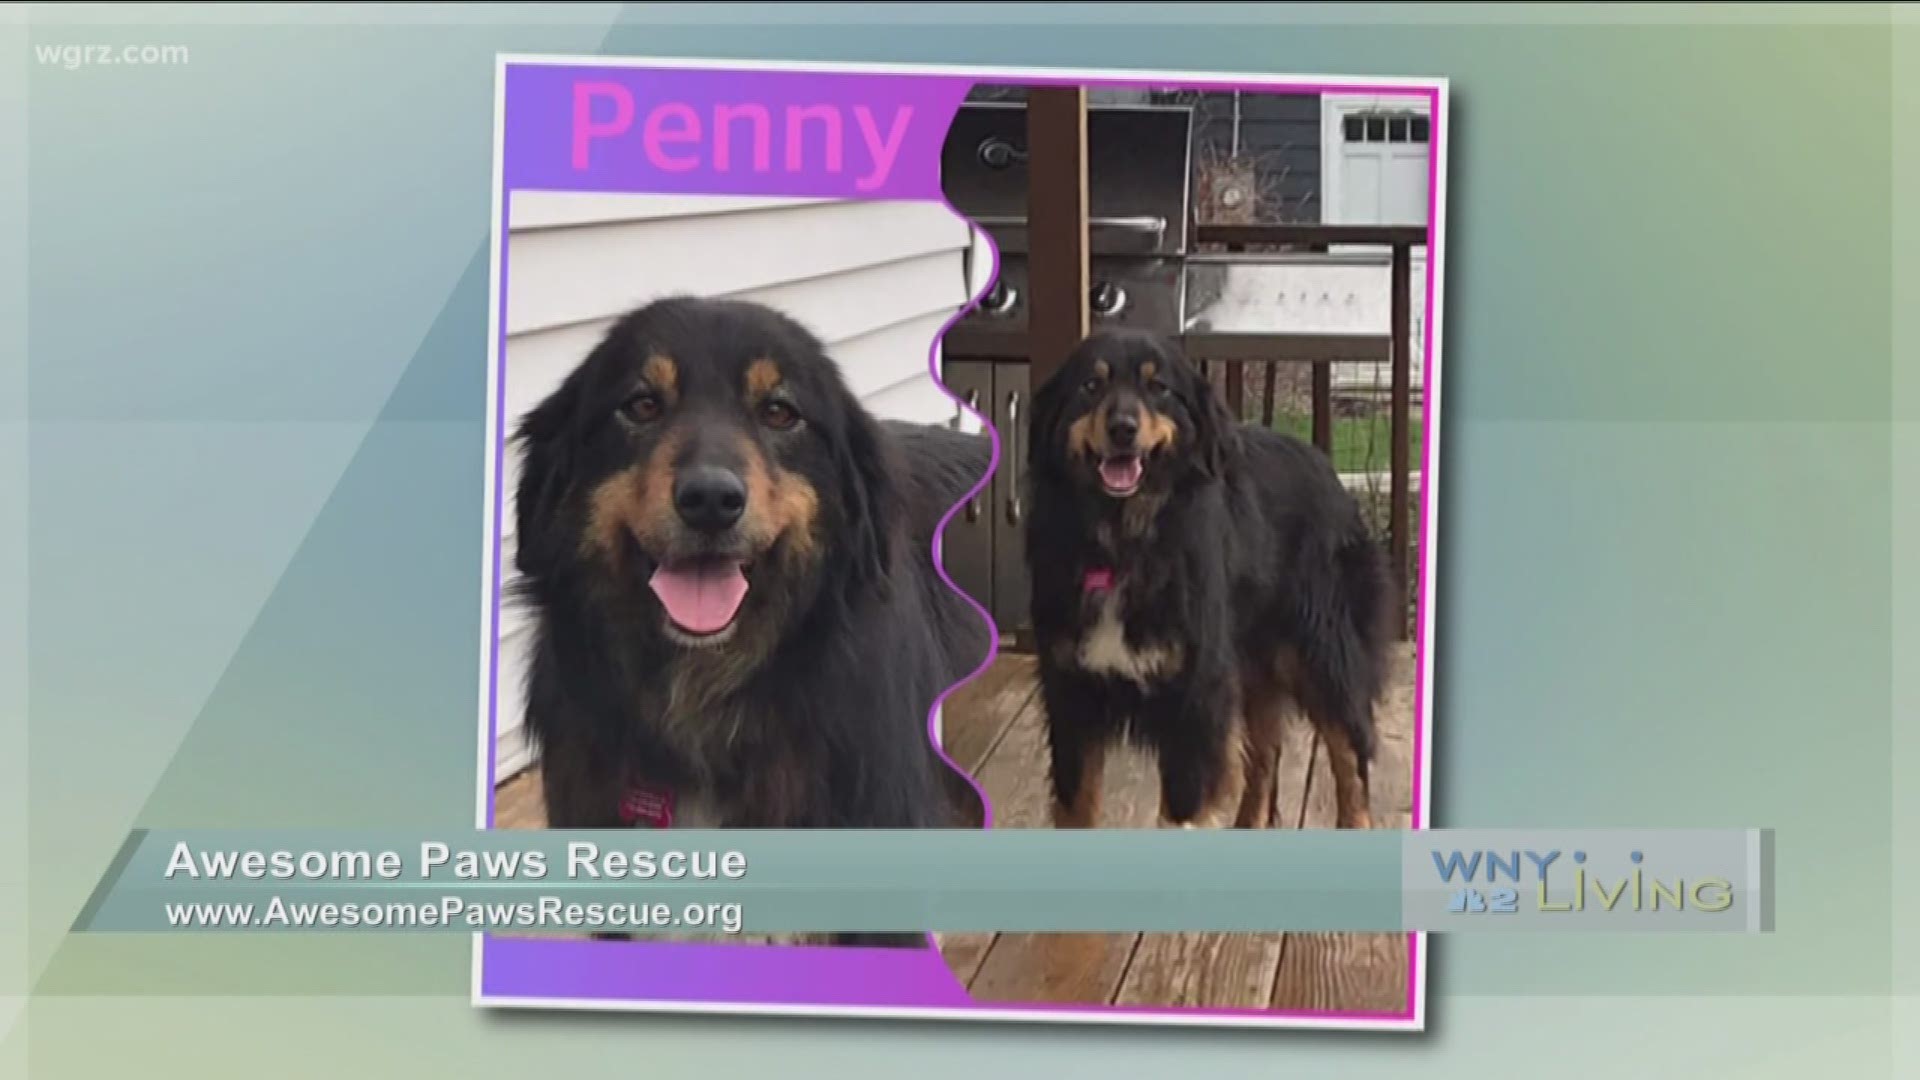 WNY Living - April 20 - Awesome Paws Rescue (SPONSORED CONTENT)